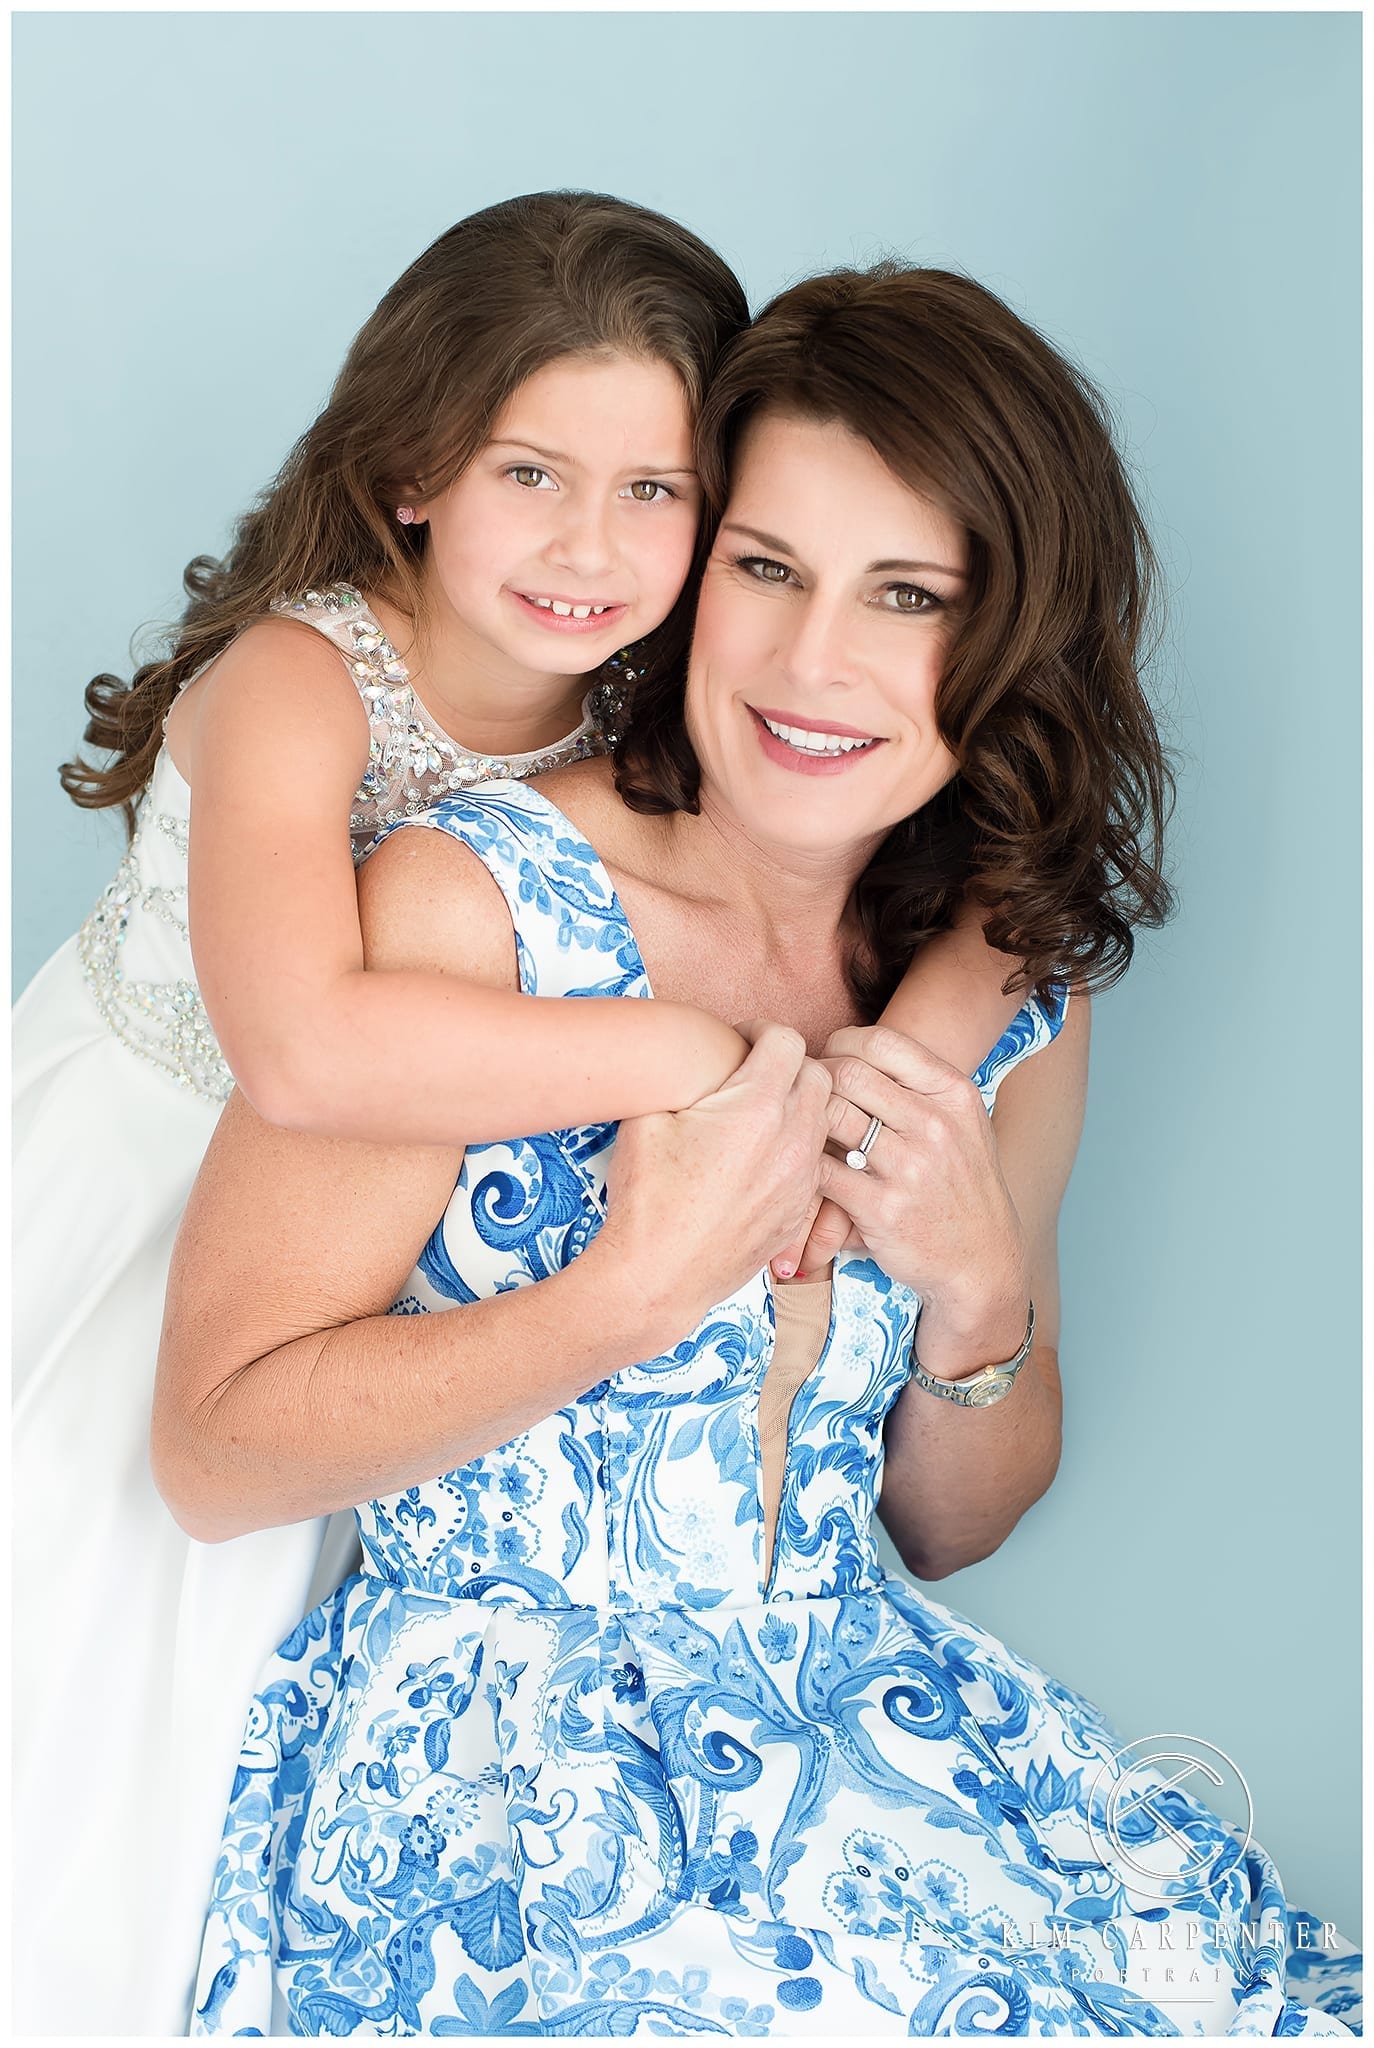 Lakeland Photographer - Mother and daughter hugging each other in blue and white dresses with a blue background